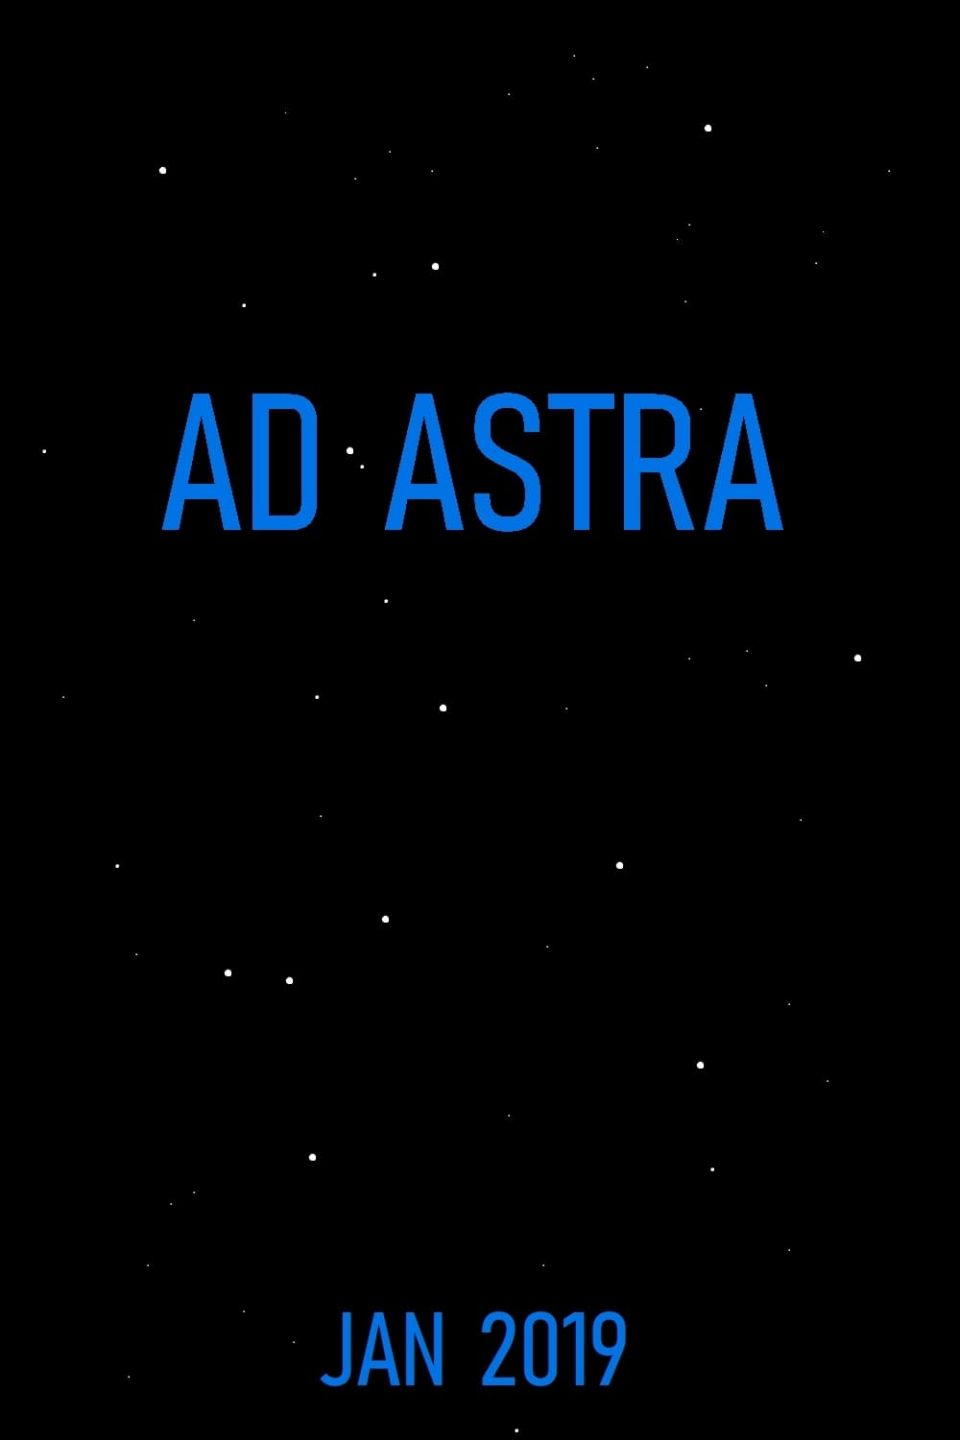 Poster for the movie "Ad Astra"